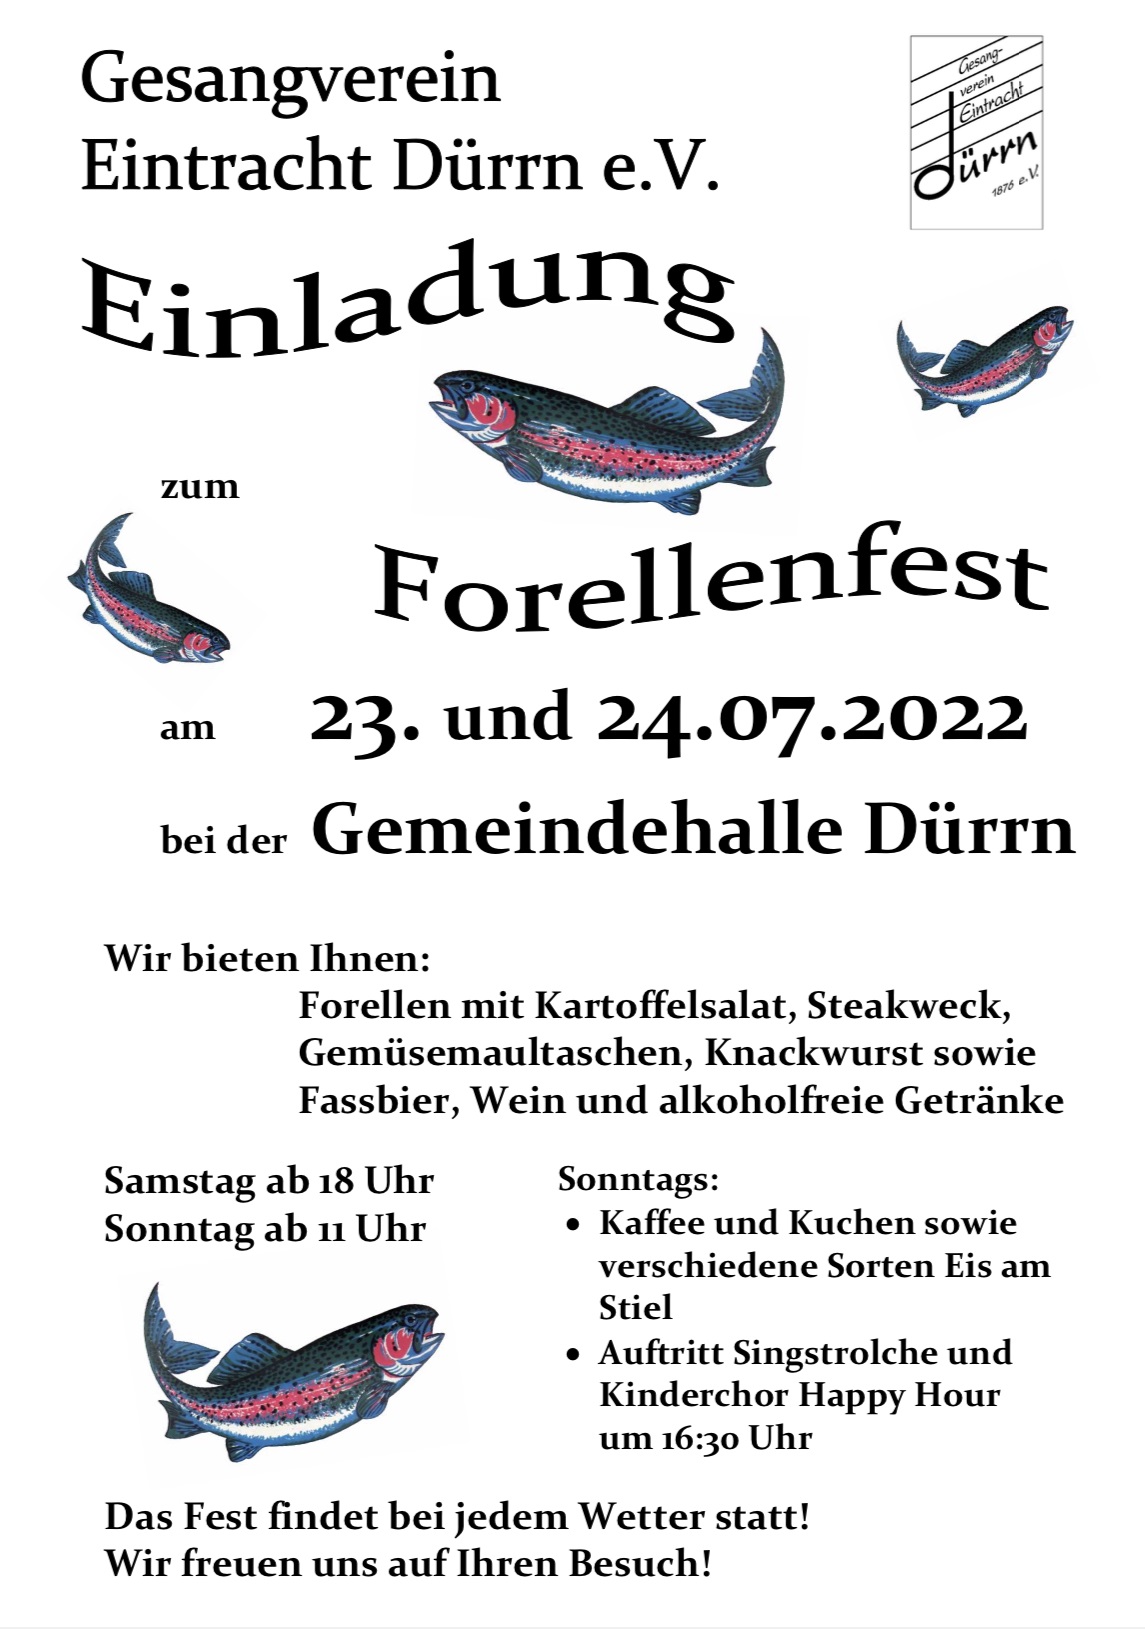 Forellenfest 2022